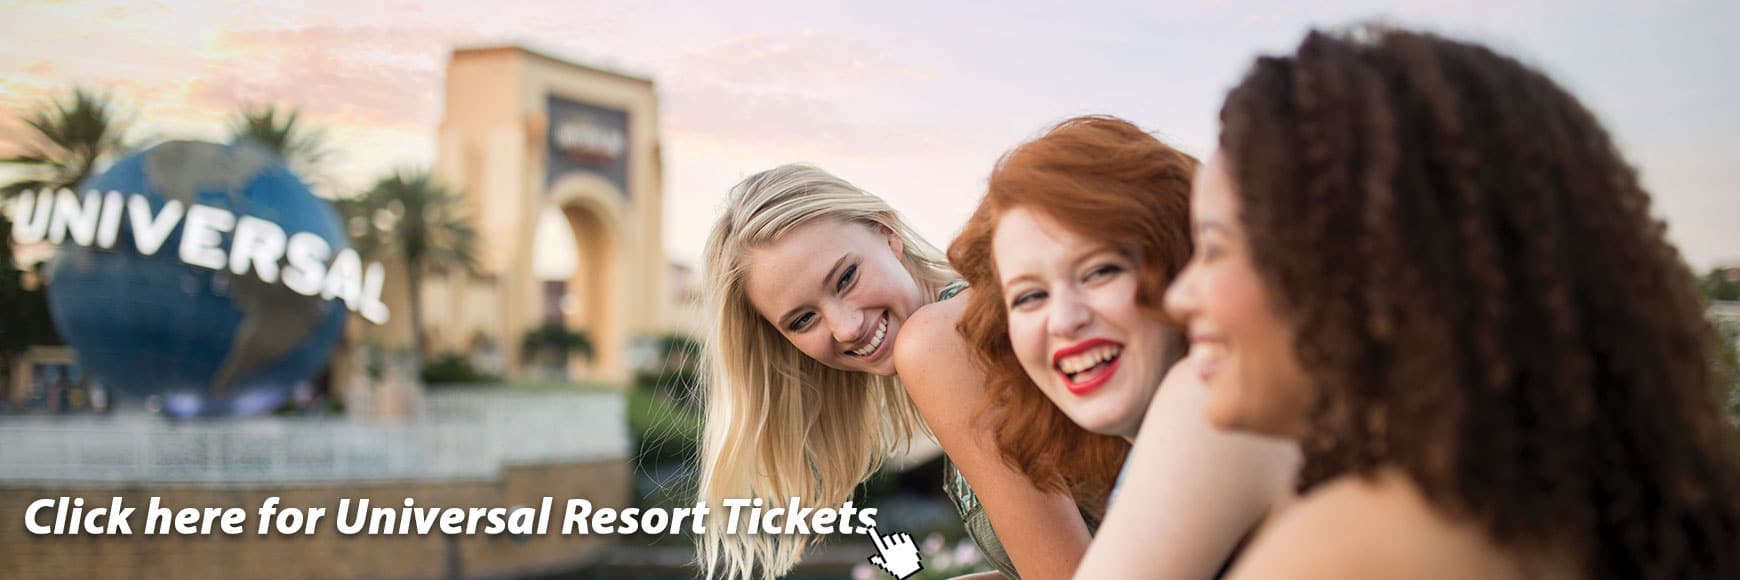 universal groupon tickets